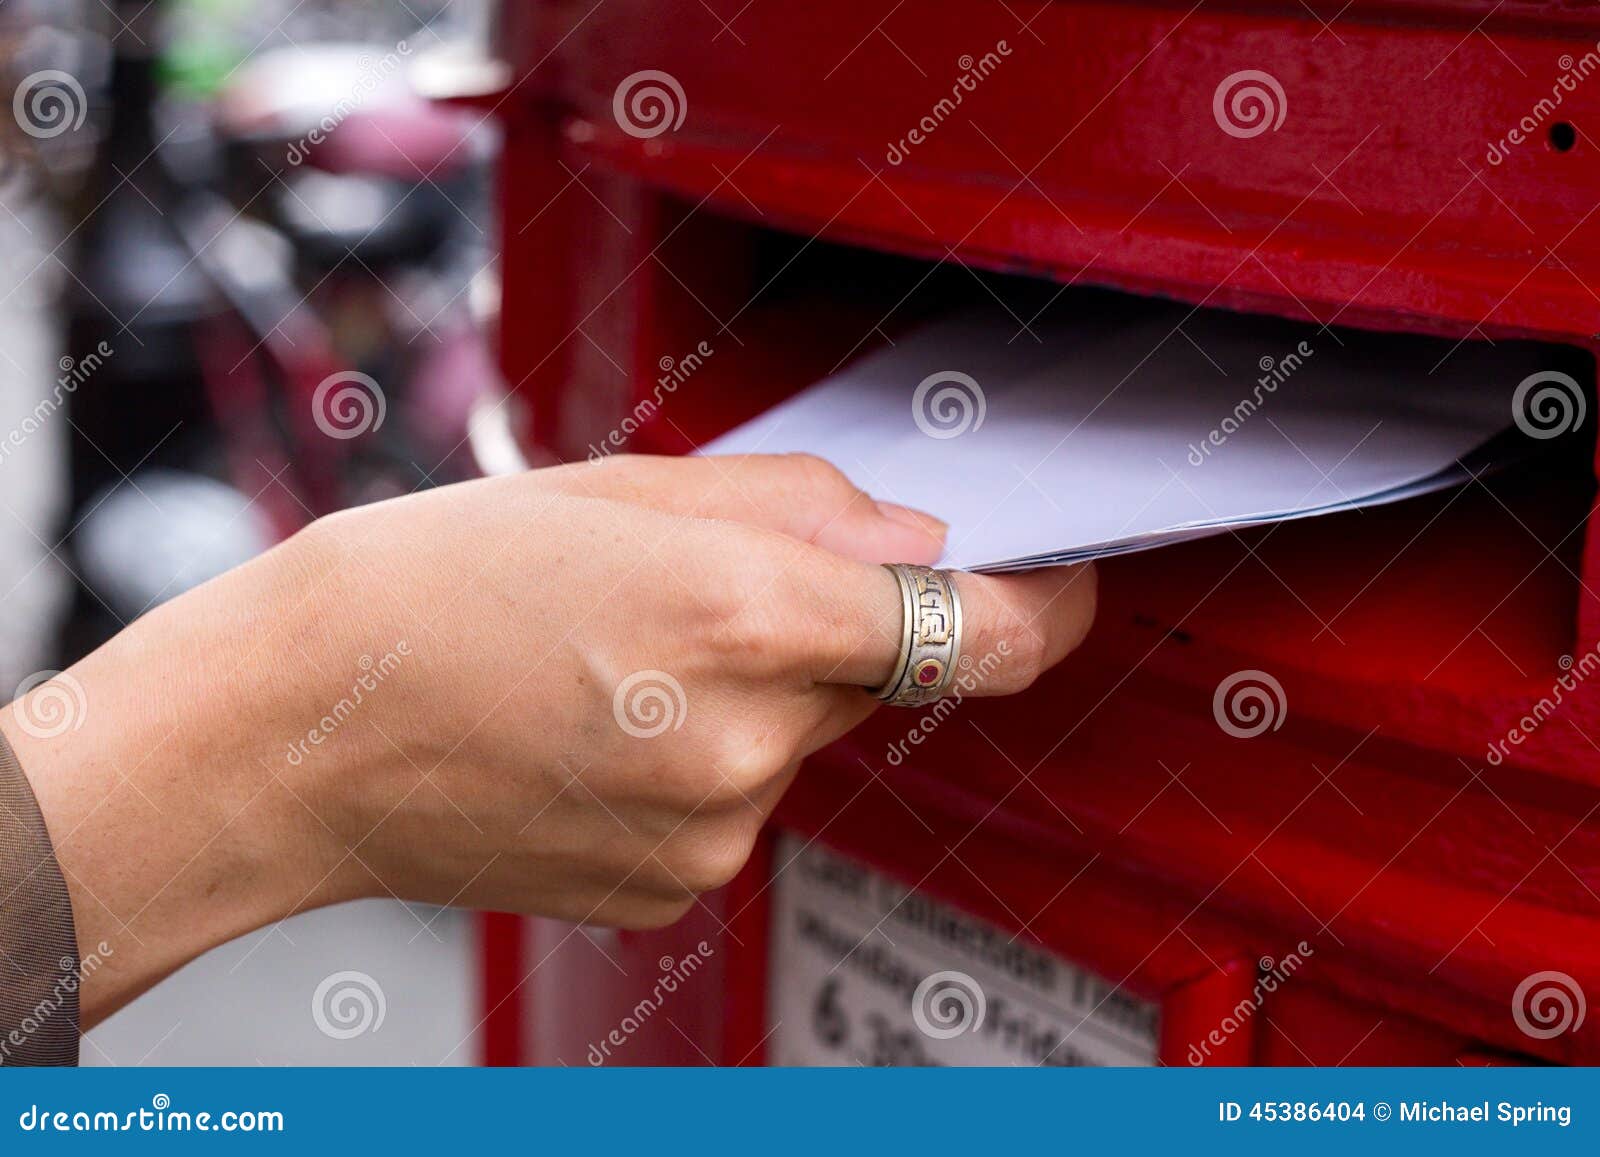 posting letters